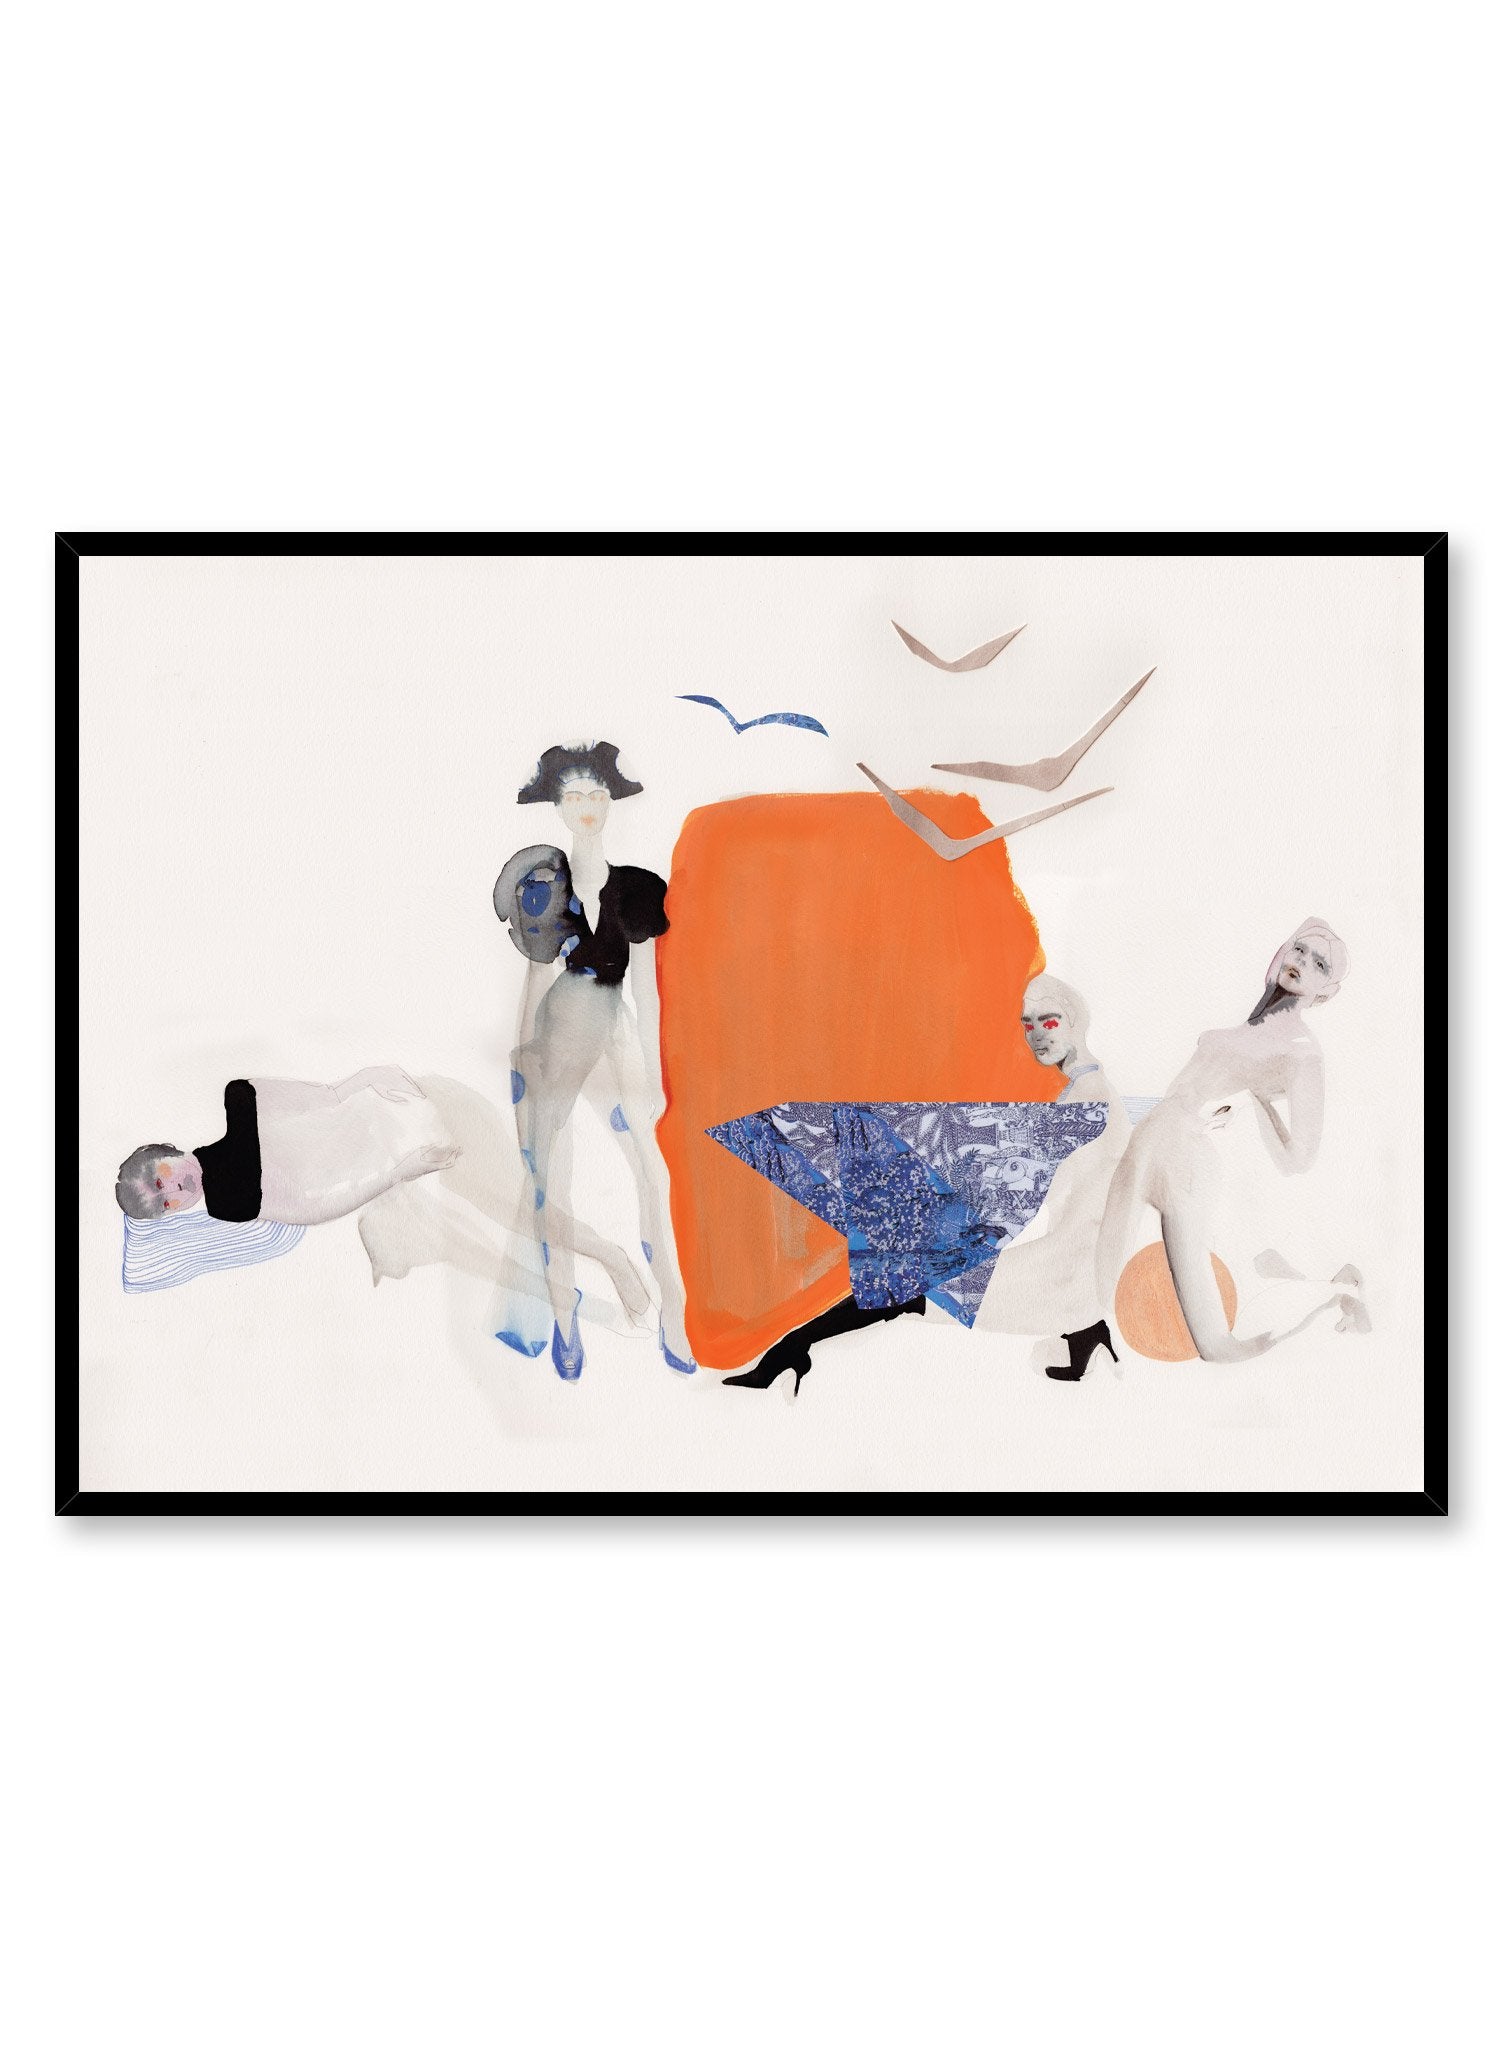 Horizontal abstract fashion poster by Opposite Wall of four minimalist model silhouettes and flying seagulls layered over an orange and beige background.